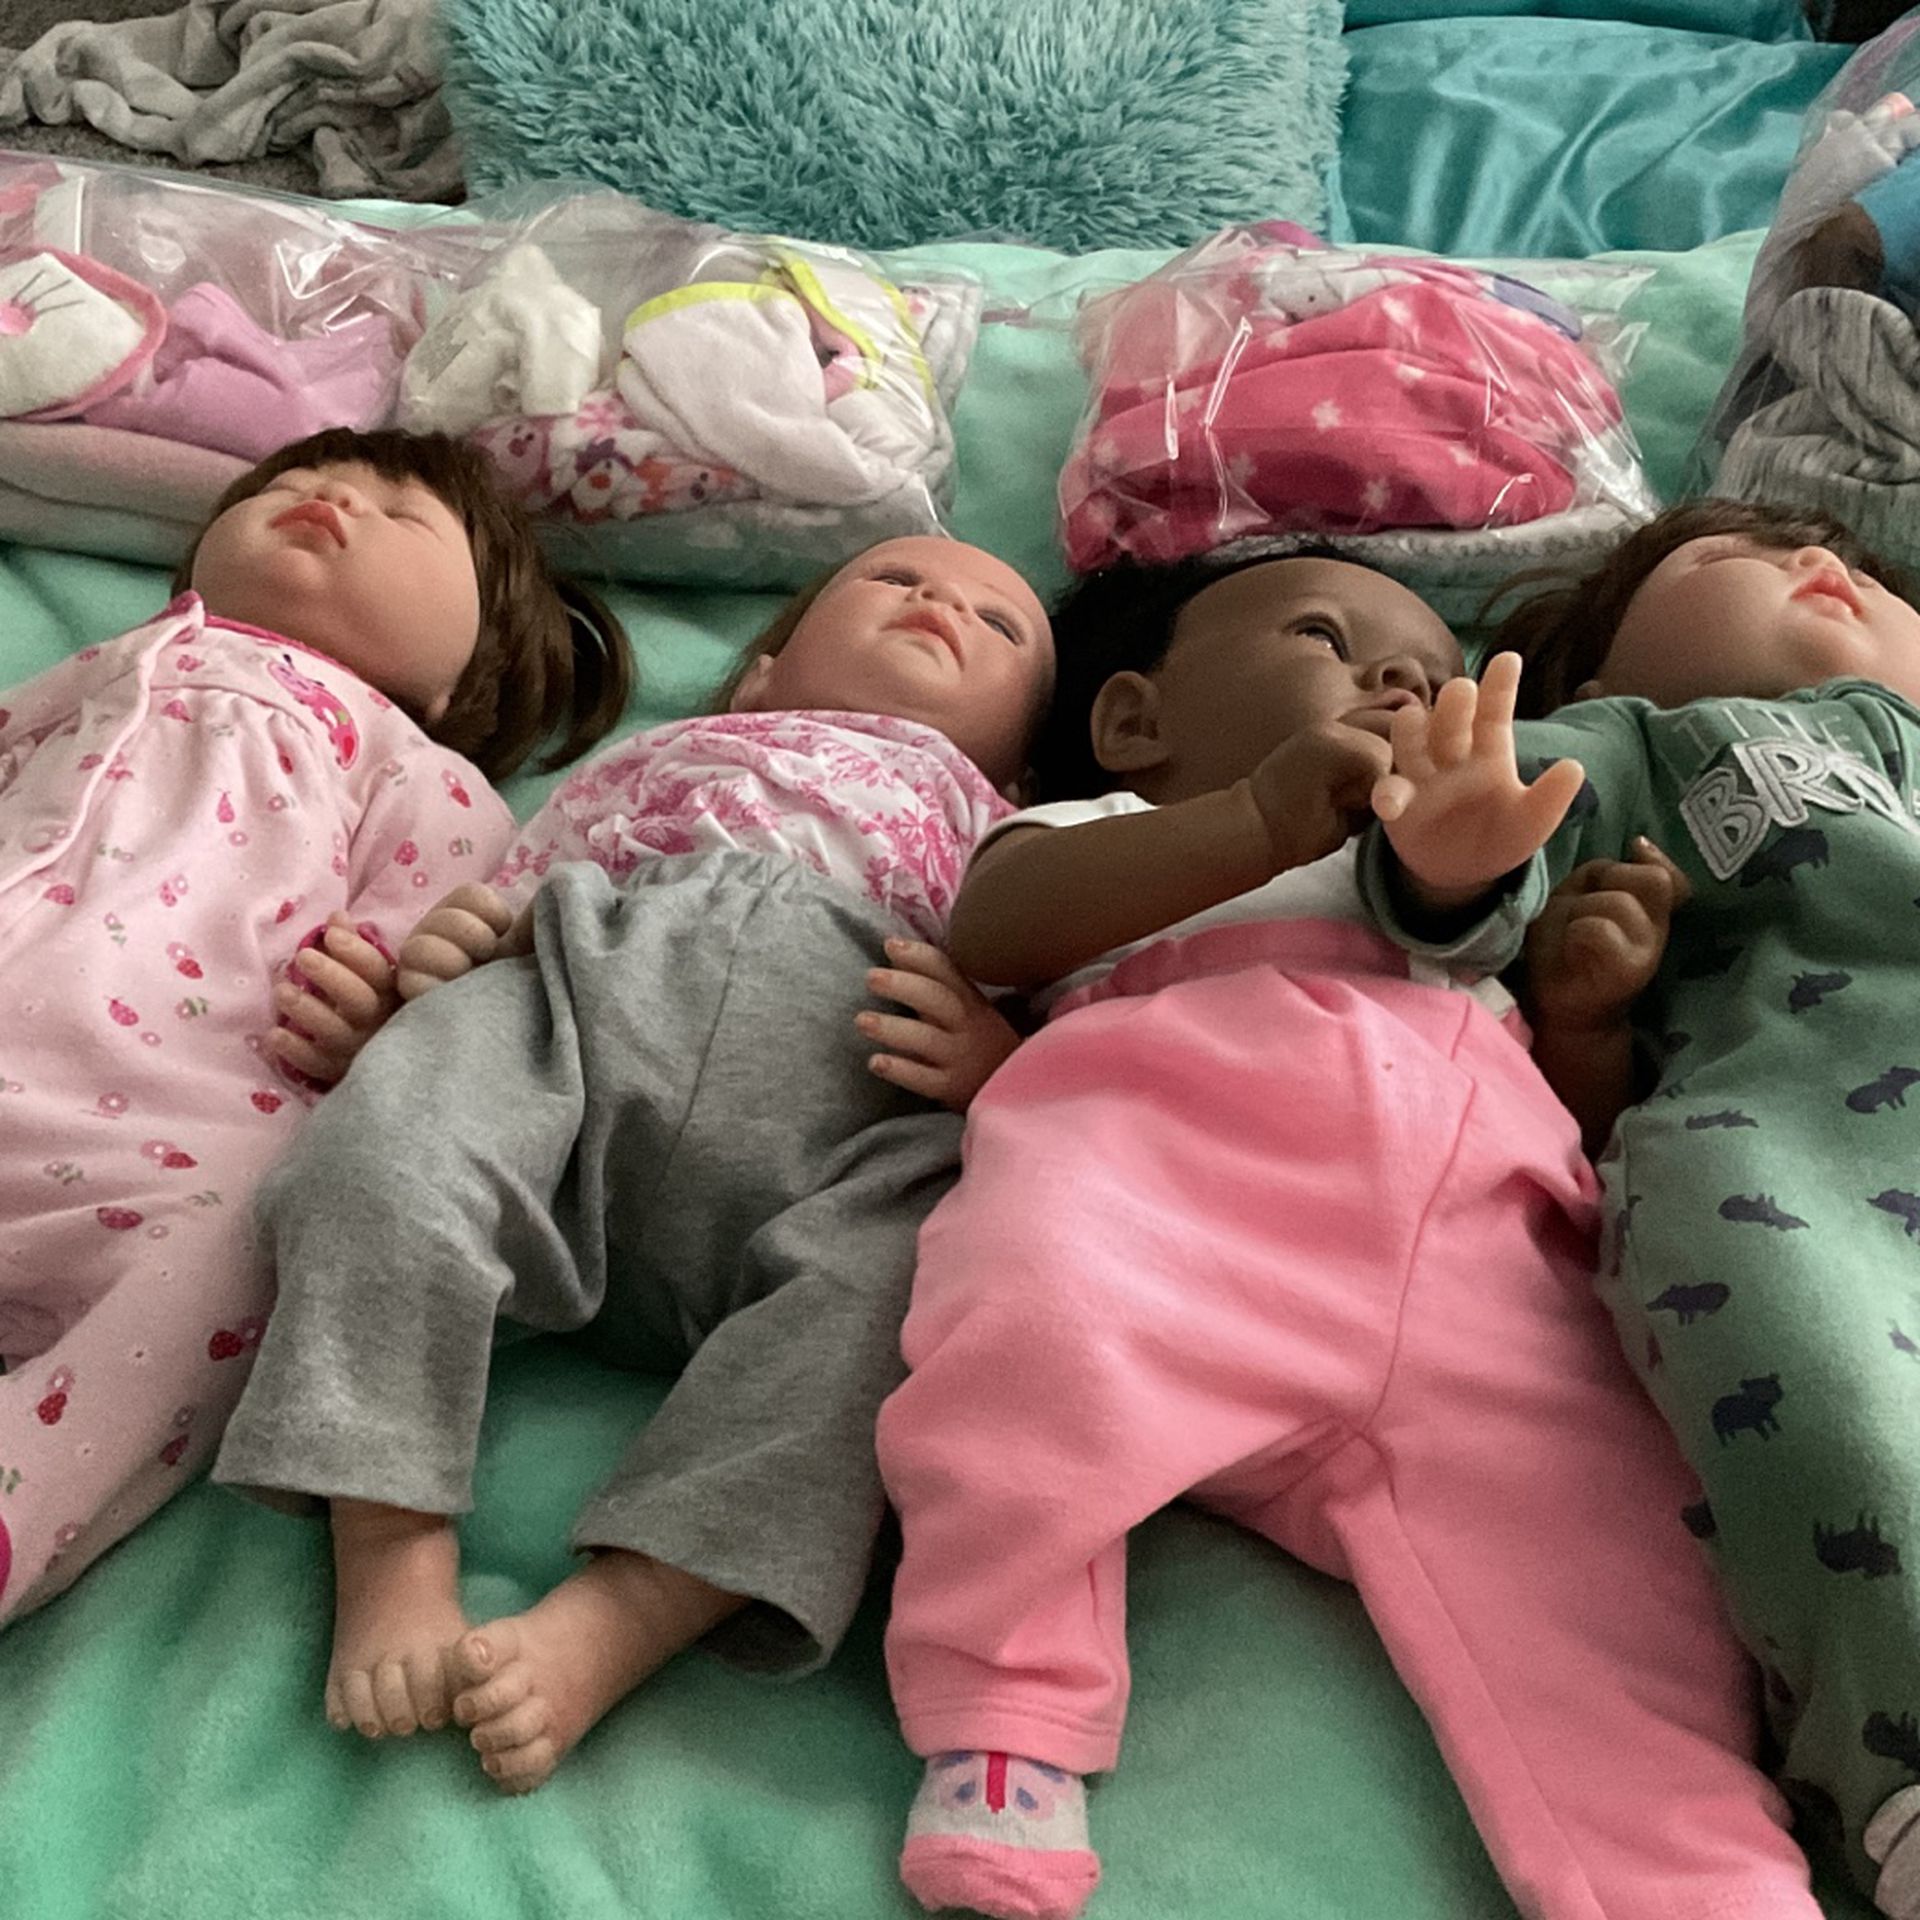 4 Reborn Dolls Comes With A Change Of Clothes A Blanket A Bib A Pacifier Stuffed Animals  And Socks For Each Doll With A Crib